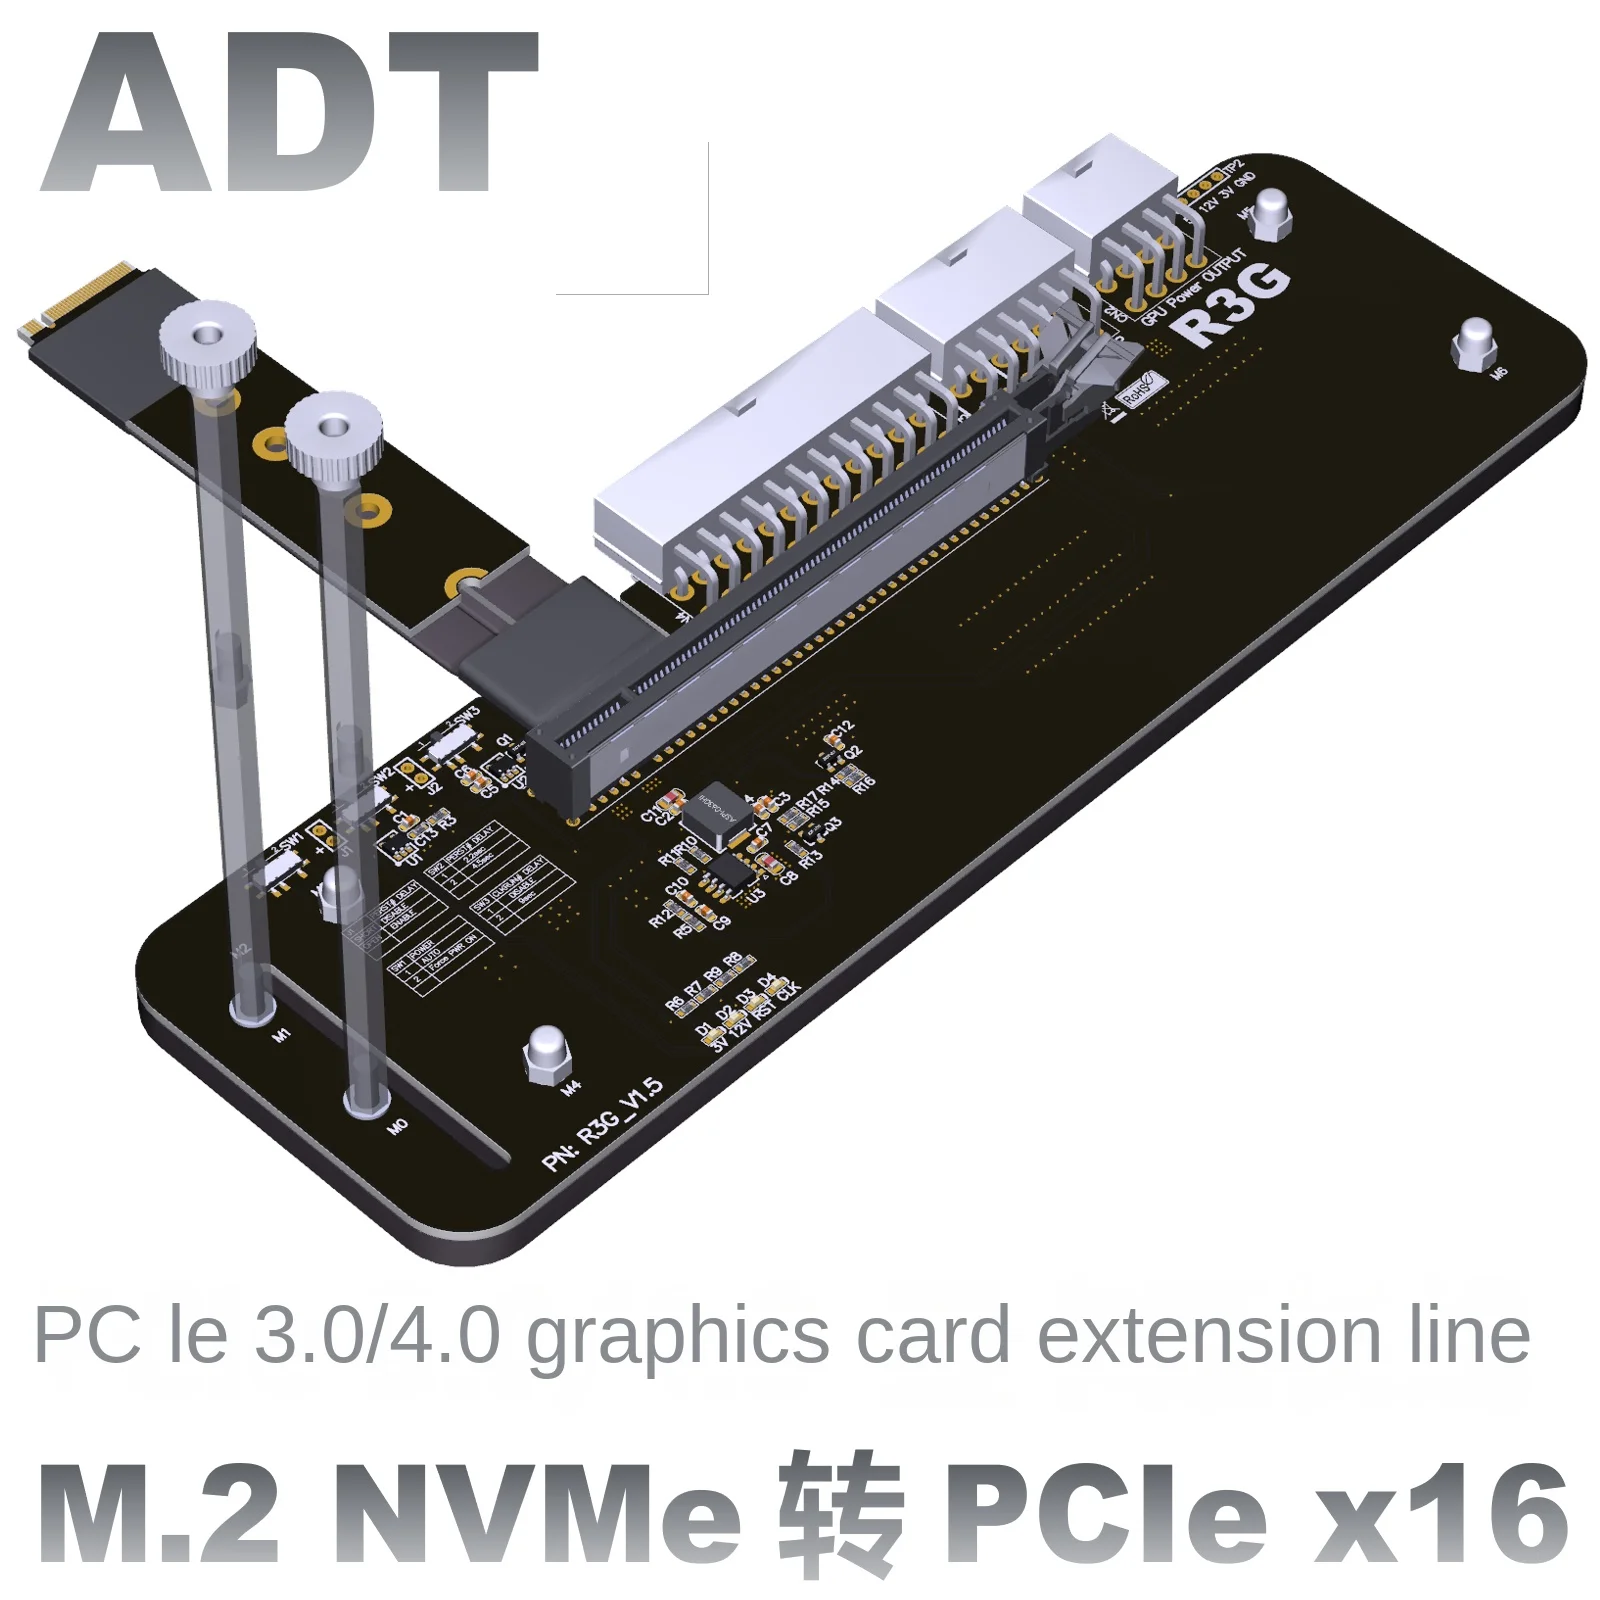 external-connection-of-r3g-notebook-graphics-card-to-m2-nvme-pcie-30-40x4-docking-station-full-speed